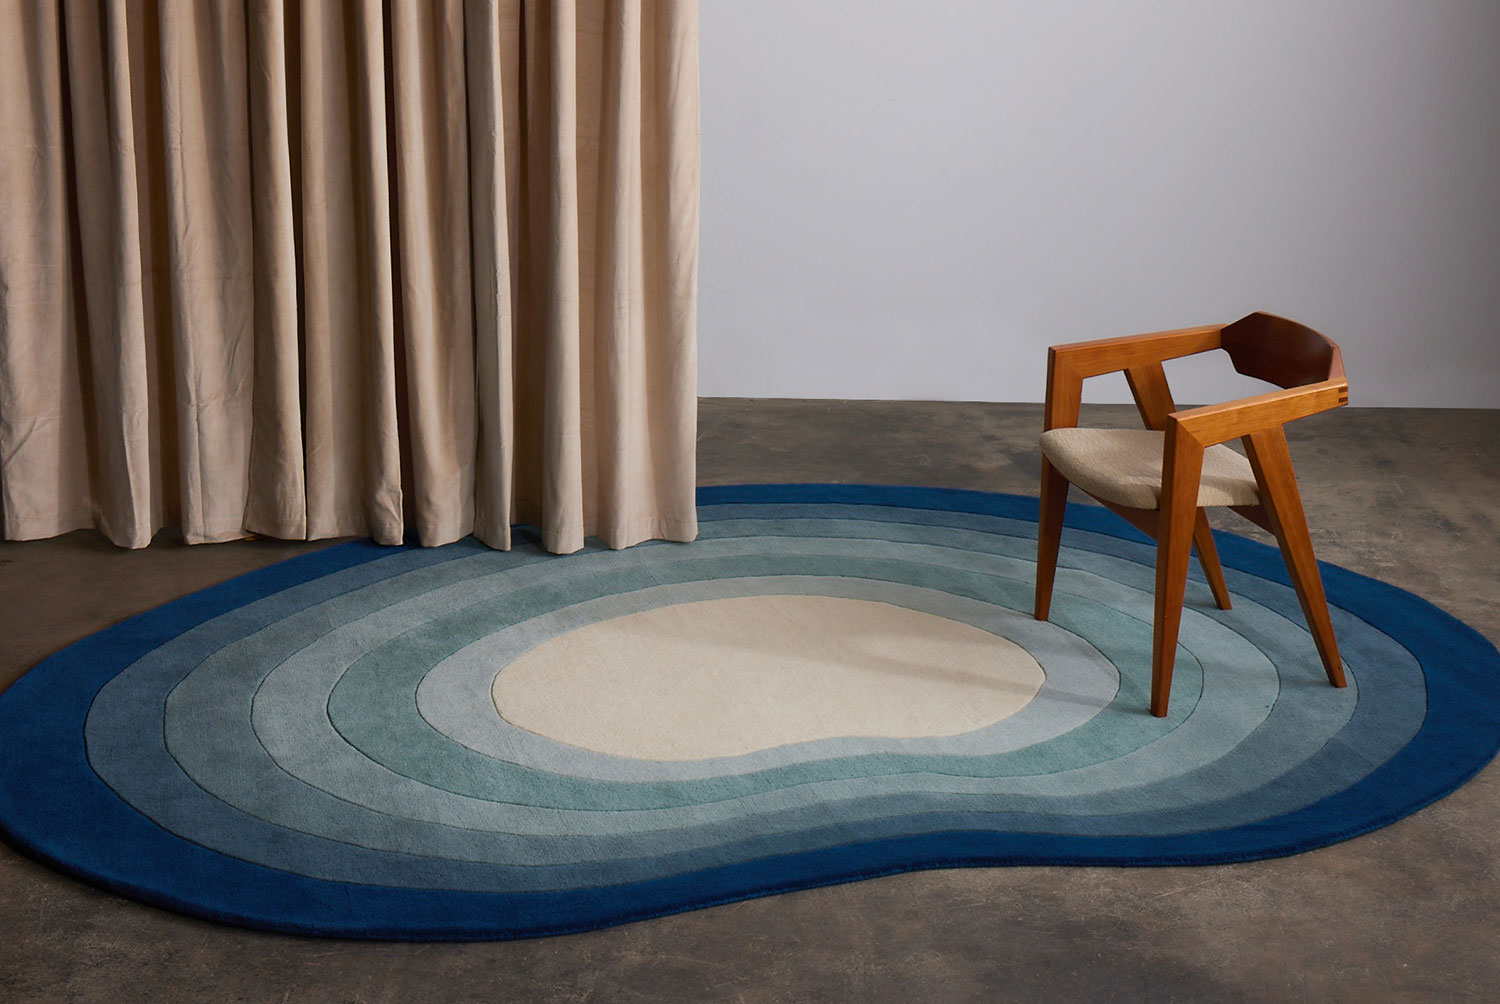 A blue gradient area rug called Pool Dream with a wooden chair on it.